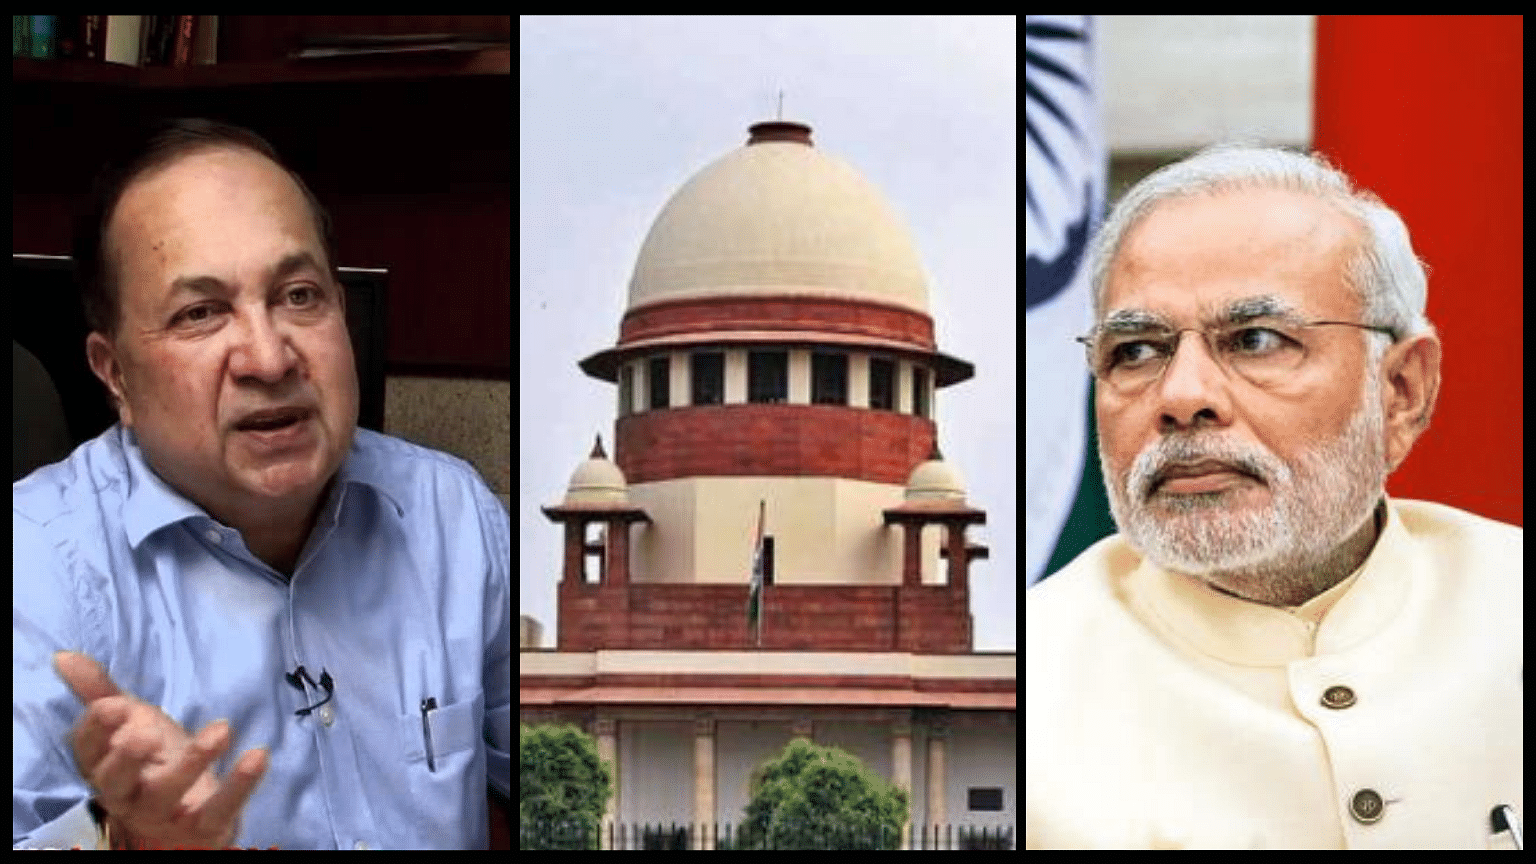 Former editor-in-chief of <i>The Hindu</i> N Ram speaks to <b>The Quint</b> about the significance of his latest report, and how it proves that the Modi government actively misled the Supreme Court in the Rafale case.